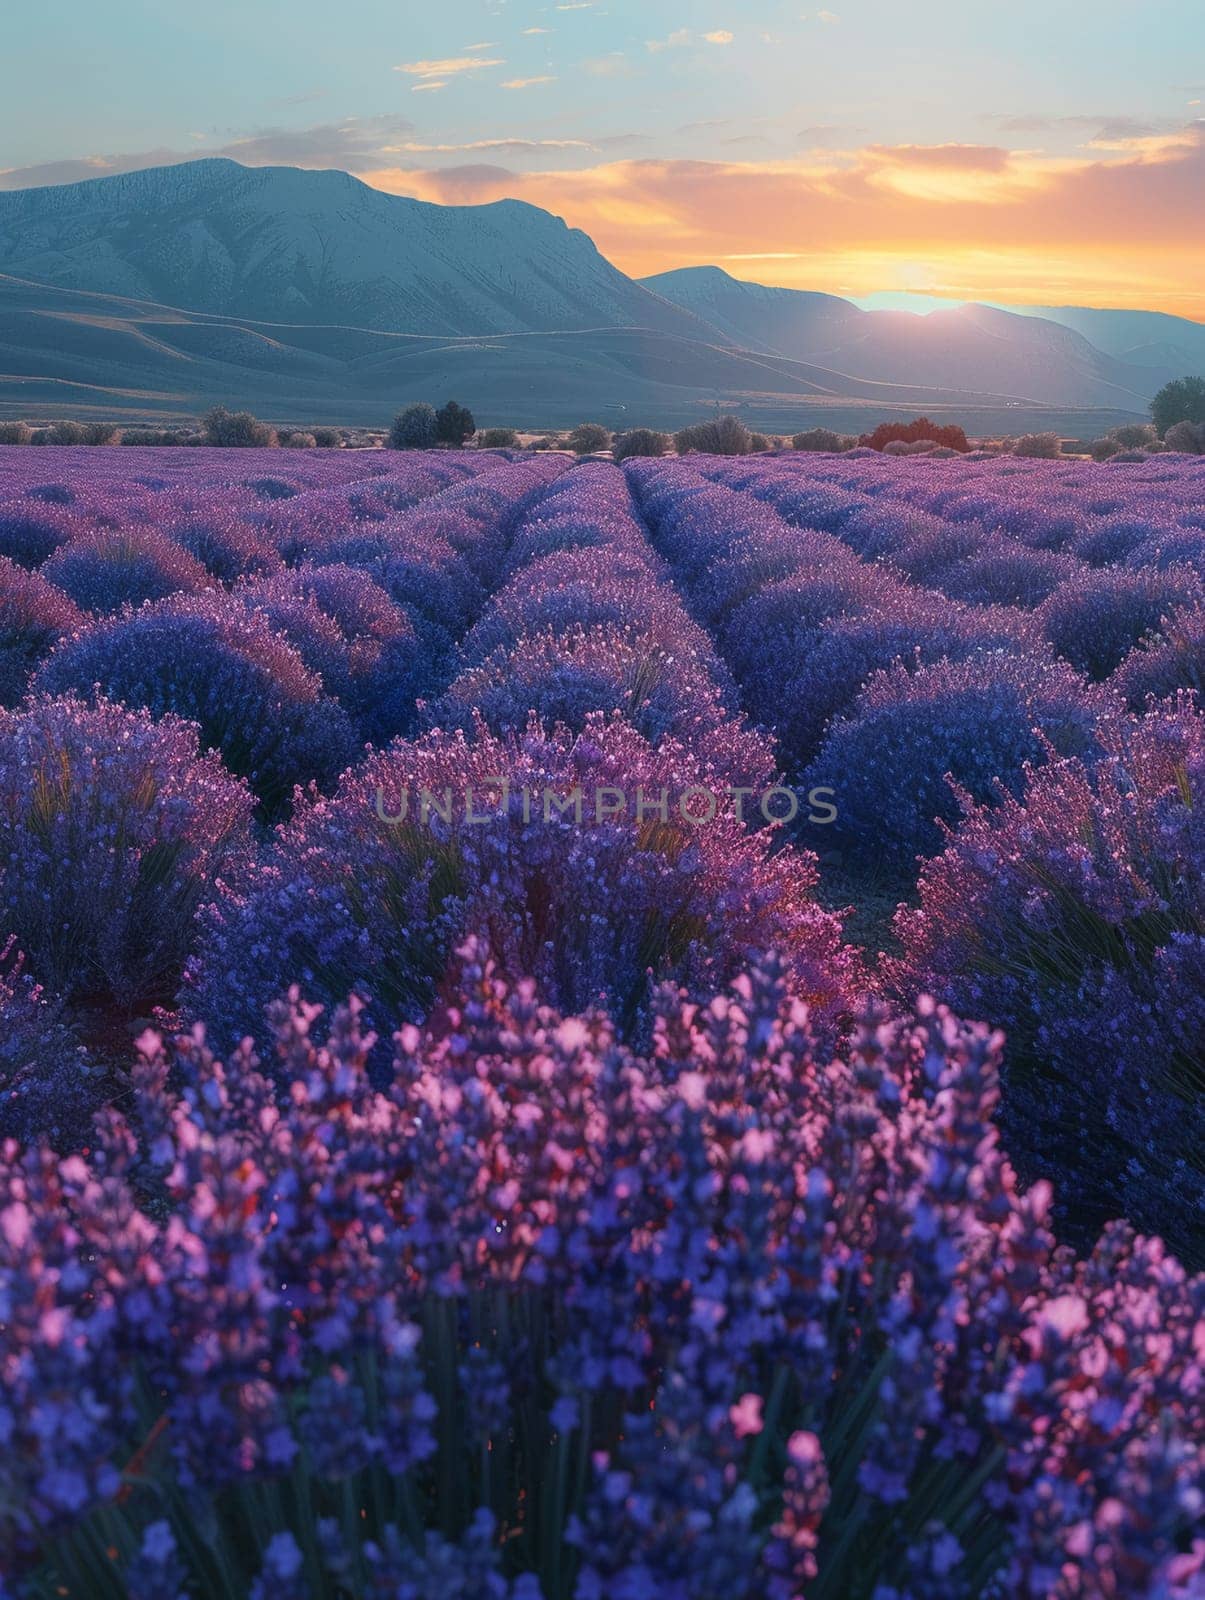 A field of lavender under a clear sky, representing calmness and natural beauty.